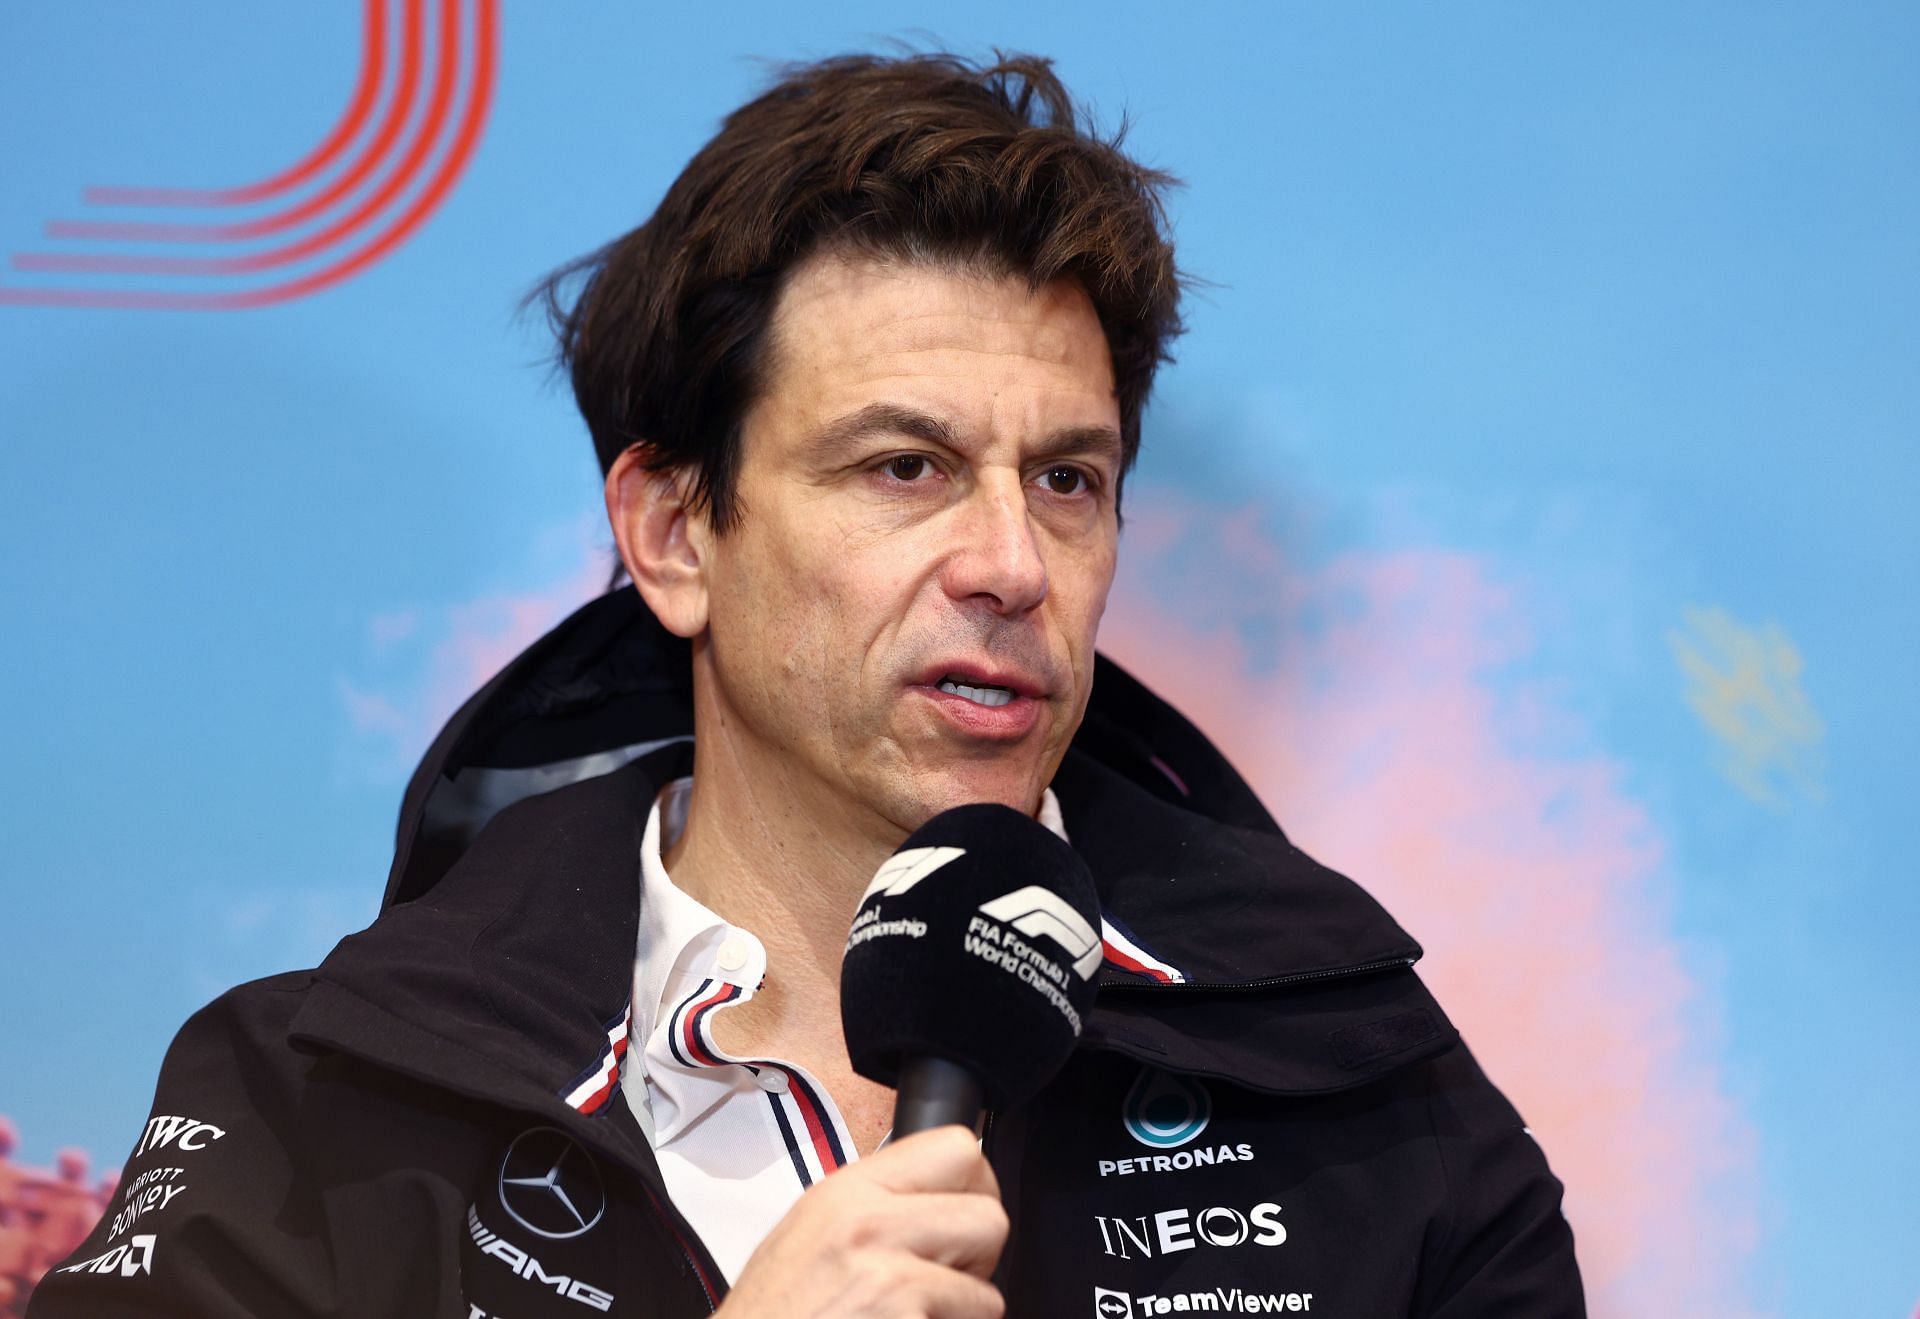 Mercedes GP executive director Toto Wolff talks at the Team Principals Press Conference before practice ahead of the F1 Grand Prix of Austria at Red Bull Ring on July 09, 2022, in Spielberg, Austria (Photo by Clive Rose/Getty Images)